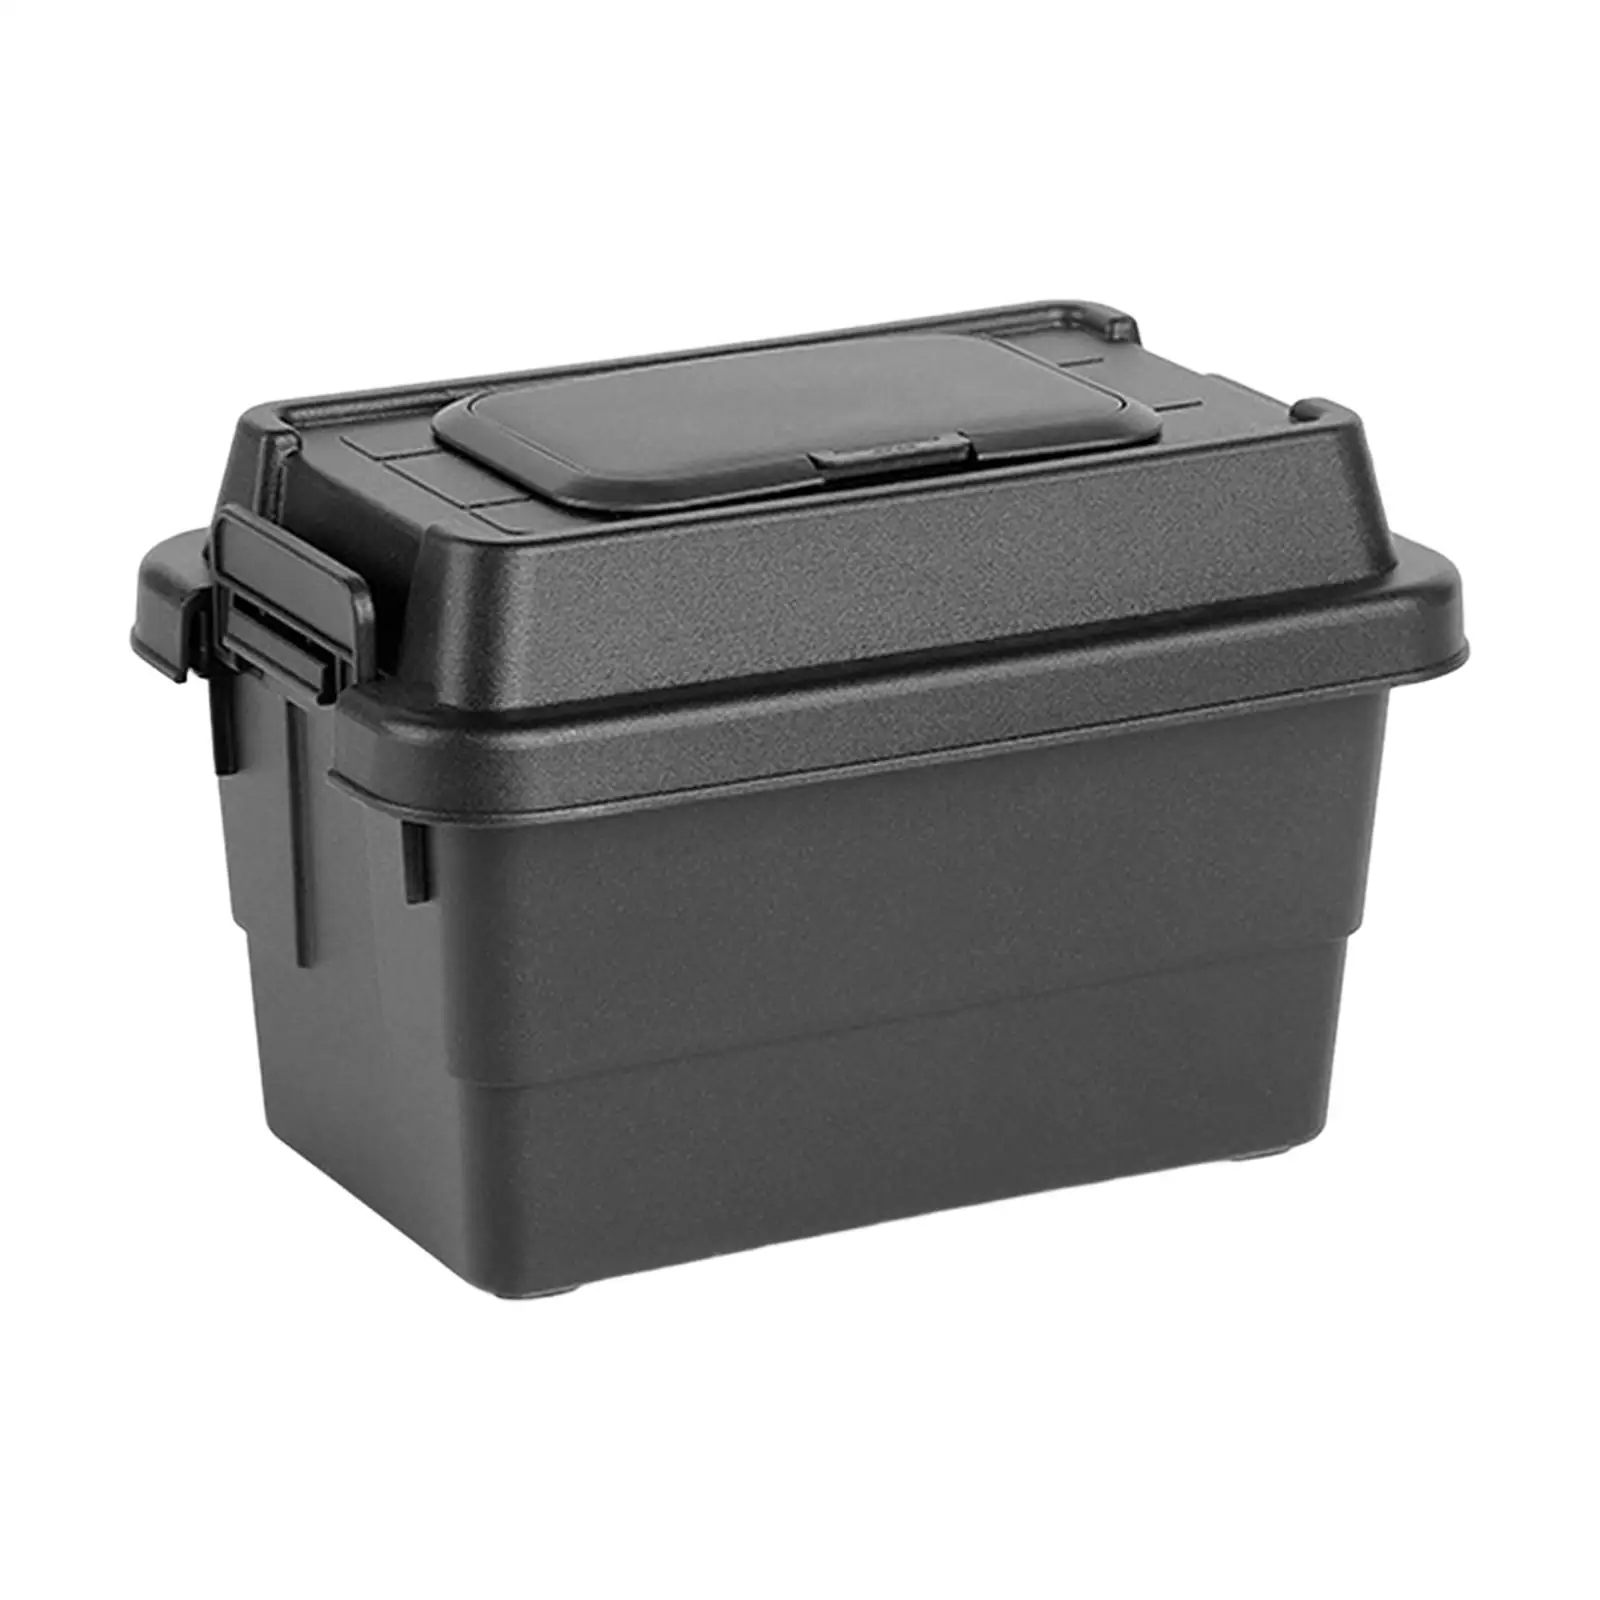 Outdoor Mini Storage Box Portable Multifunctional with Cover Sundries Outdoor Organizer for Picnic Cooking Travel BBQ Hiking